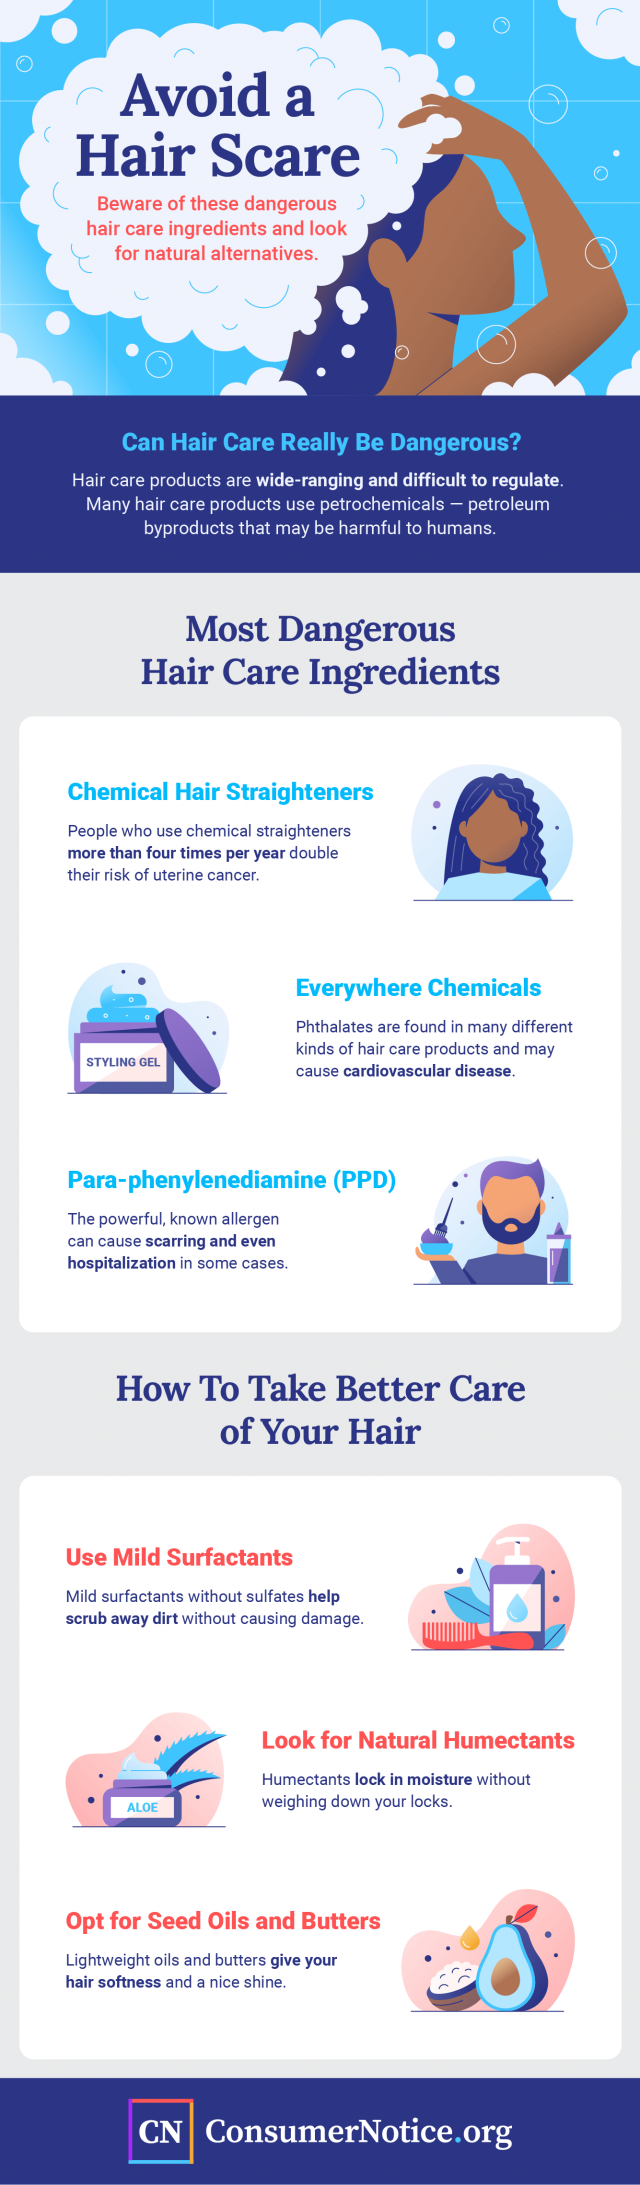 Avoid a Hair Scare infographic